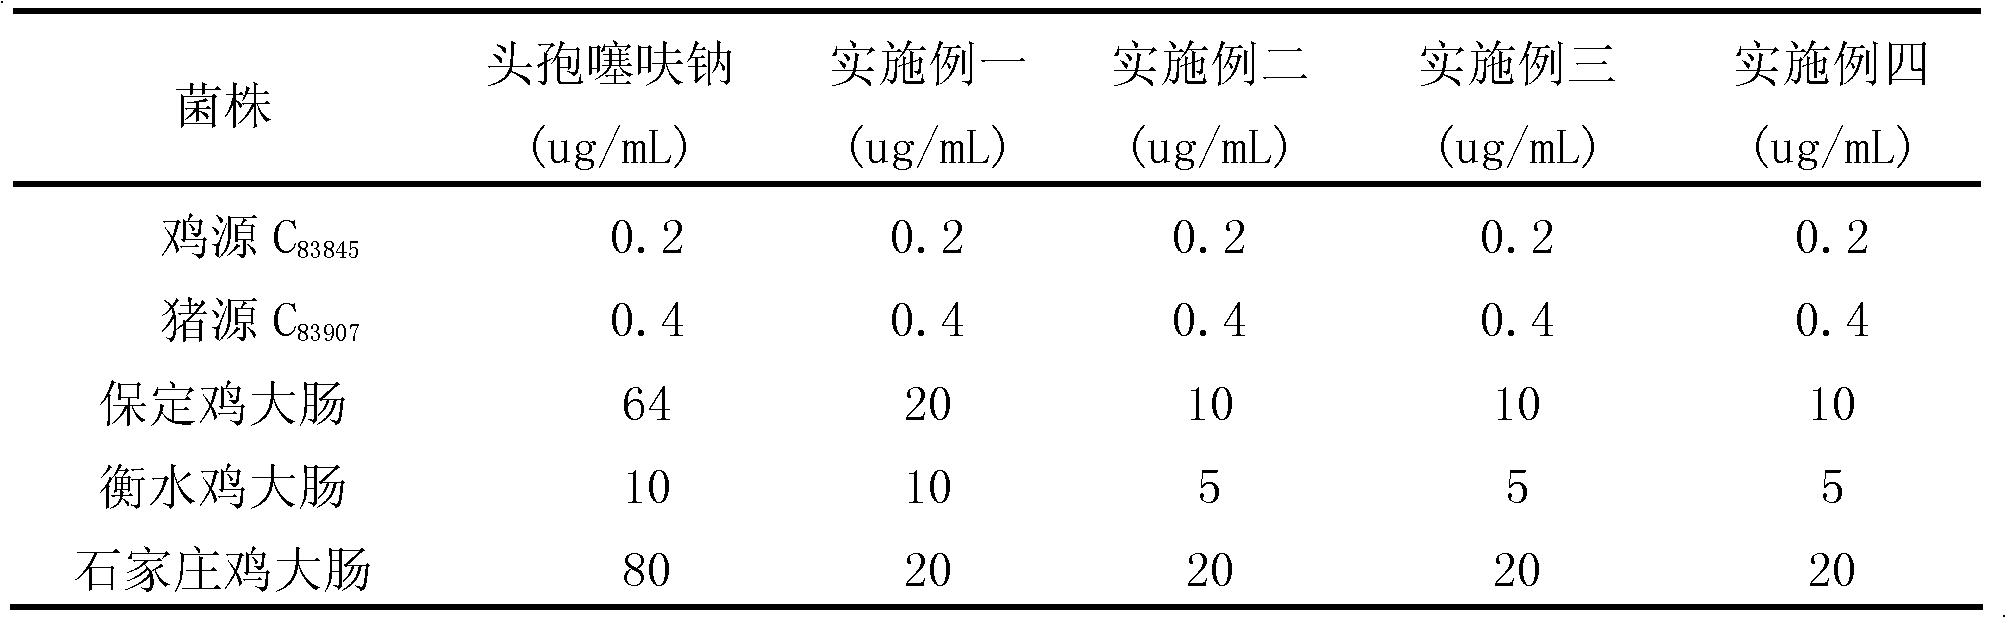 Pharmaceutical composition used for preventing and treating colibacillosis in livestock and poultry